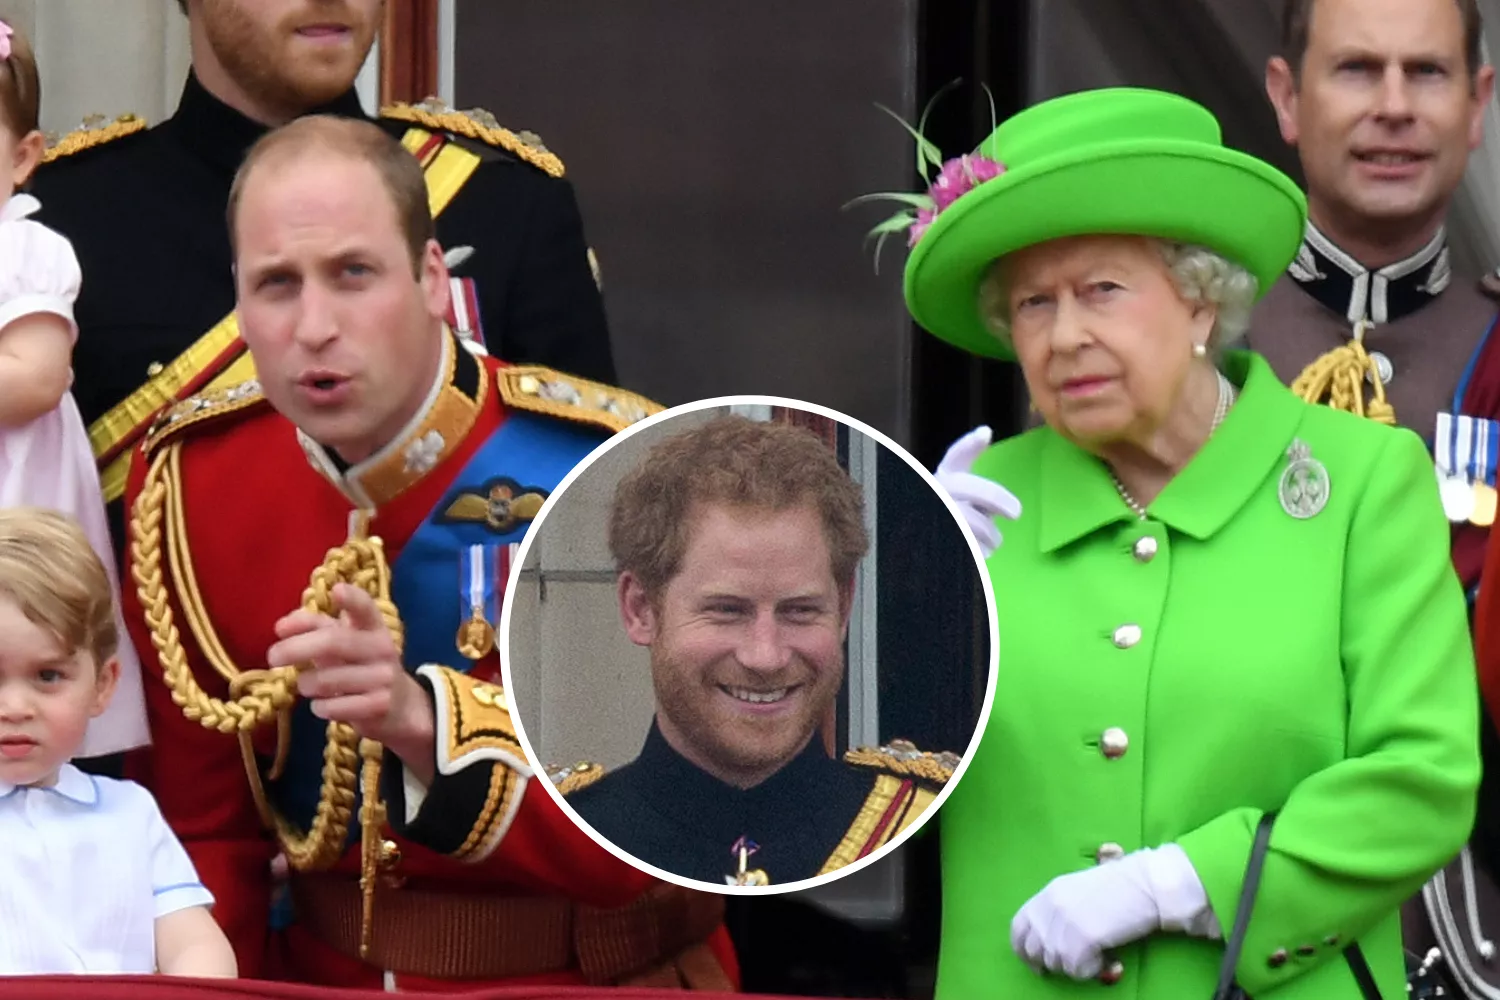 Prince William 'Snapped At' by Queen As Prince Harry Watches on—Old Clip